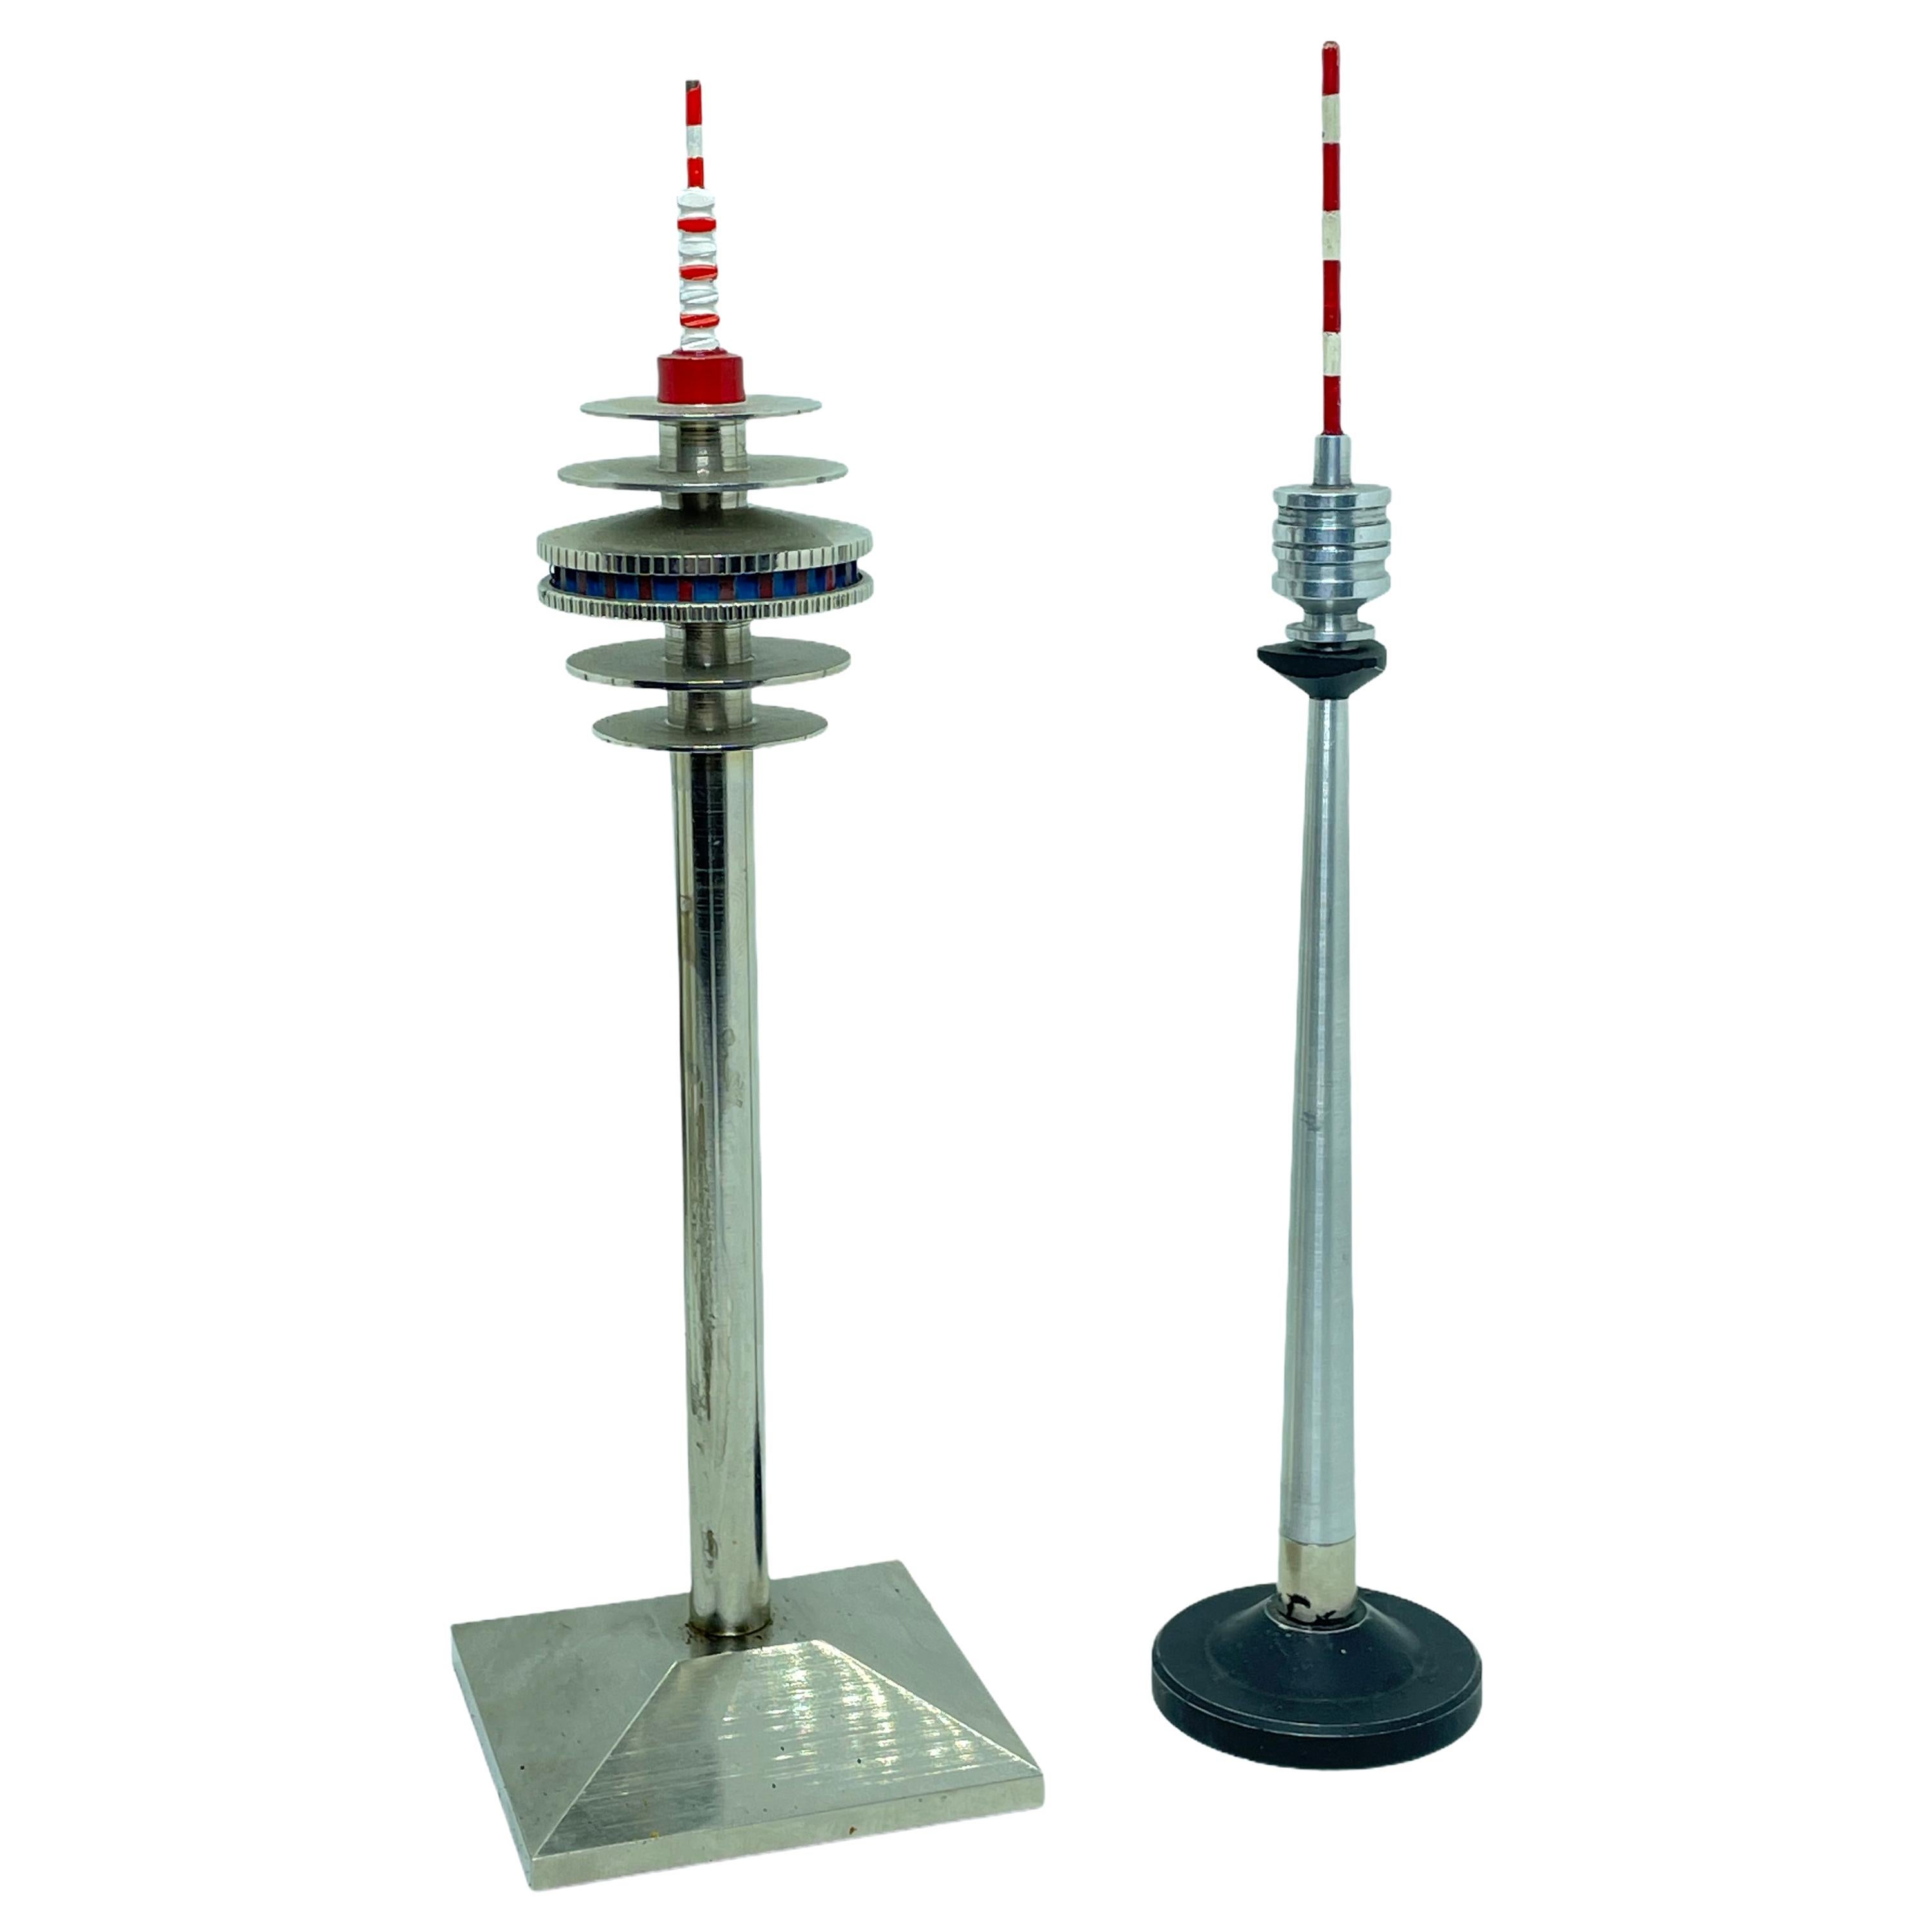 Set of Two Metal TV Television Tower Scale Design Models, Vienna Austria, 1970s For Sale